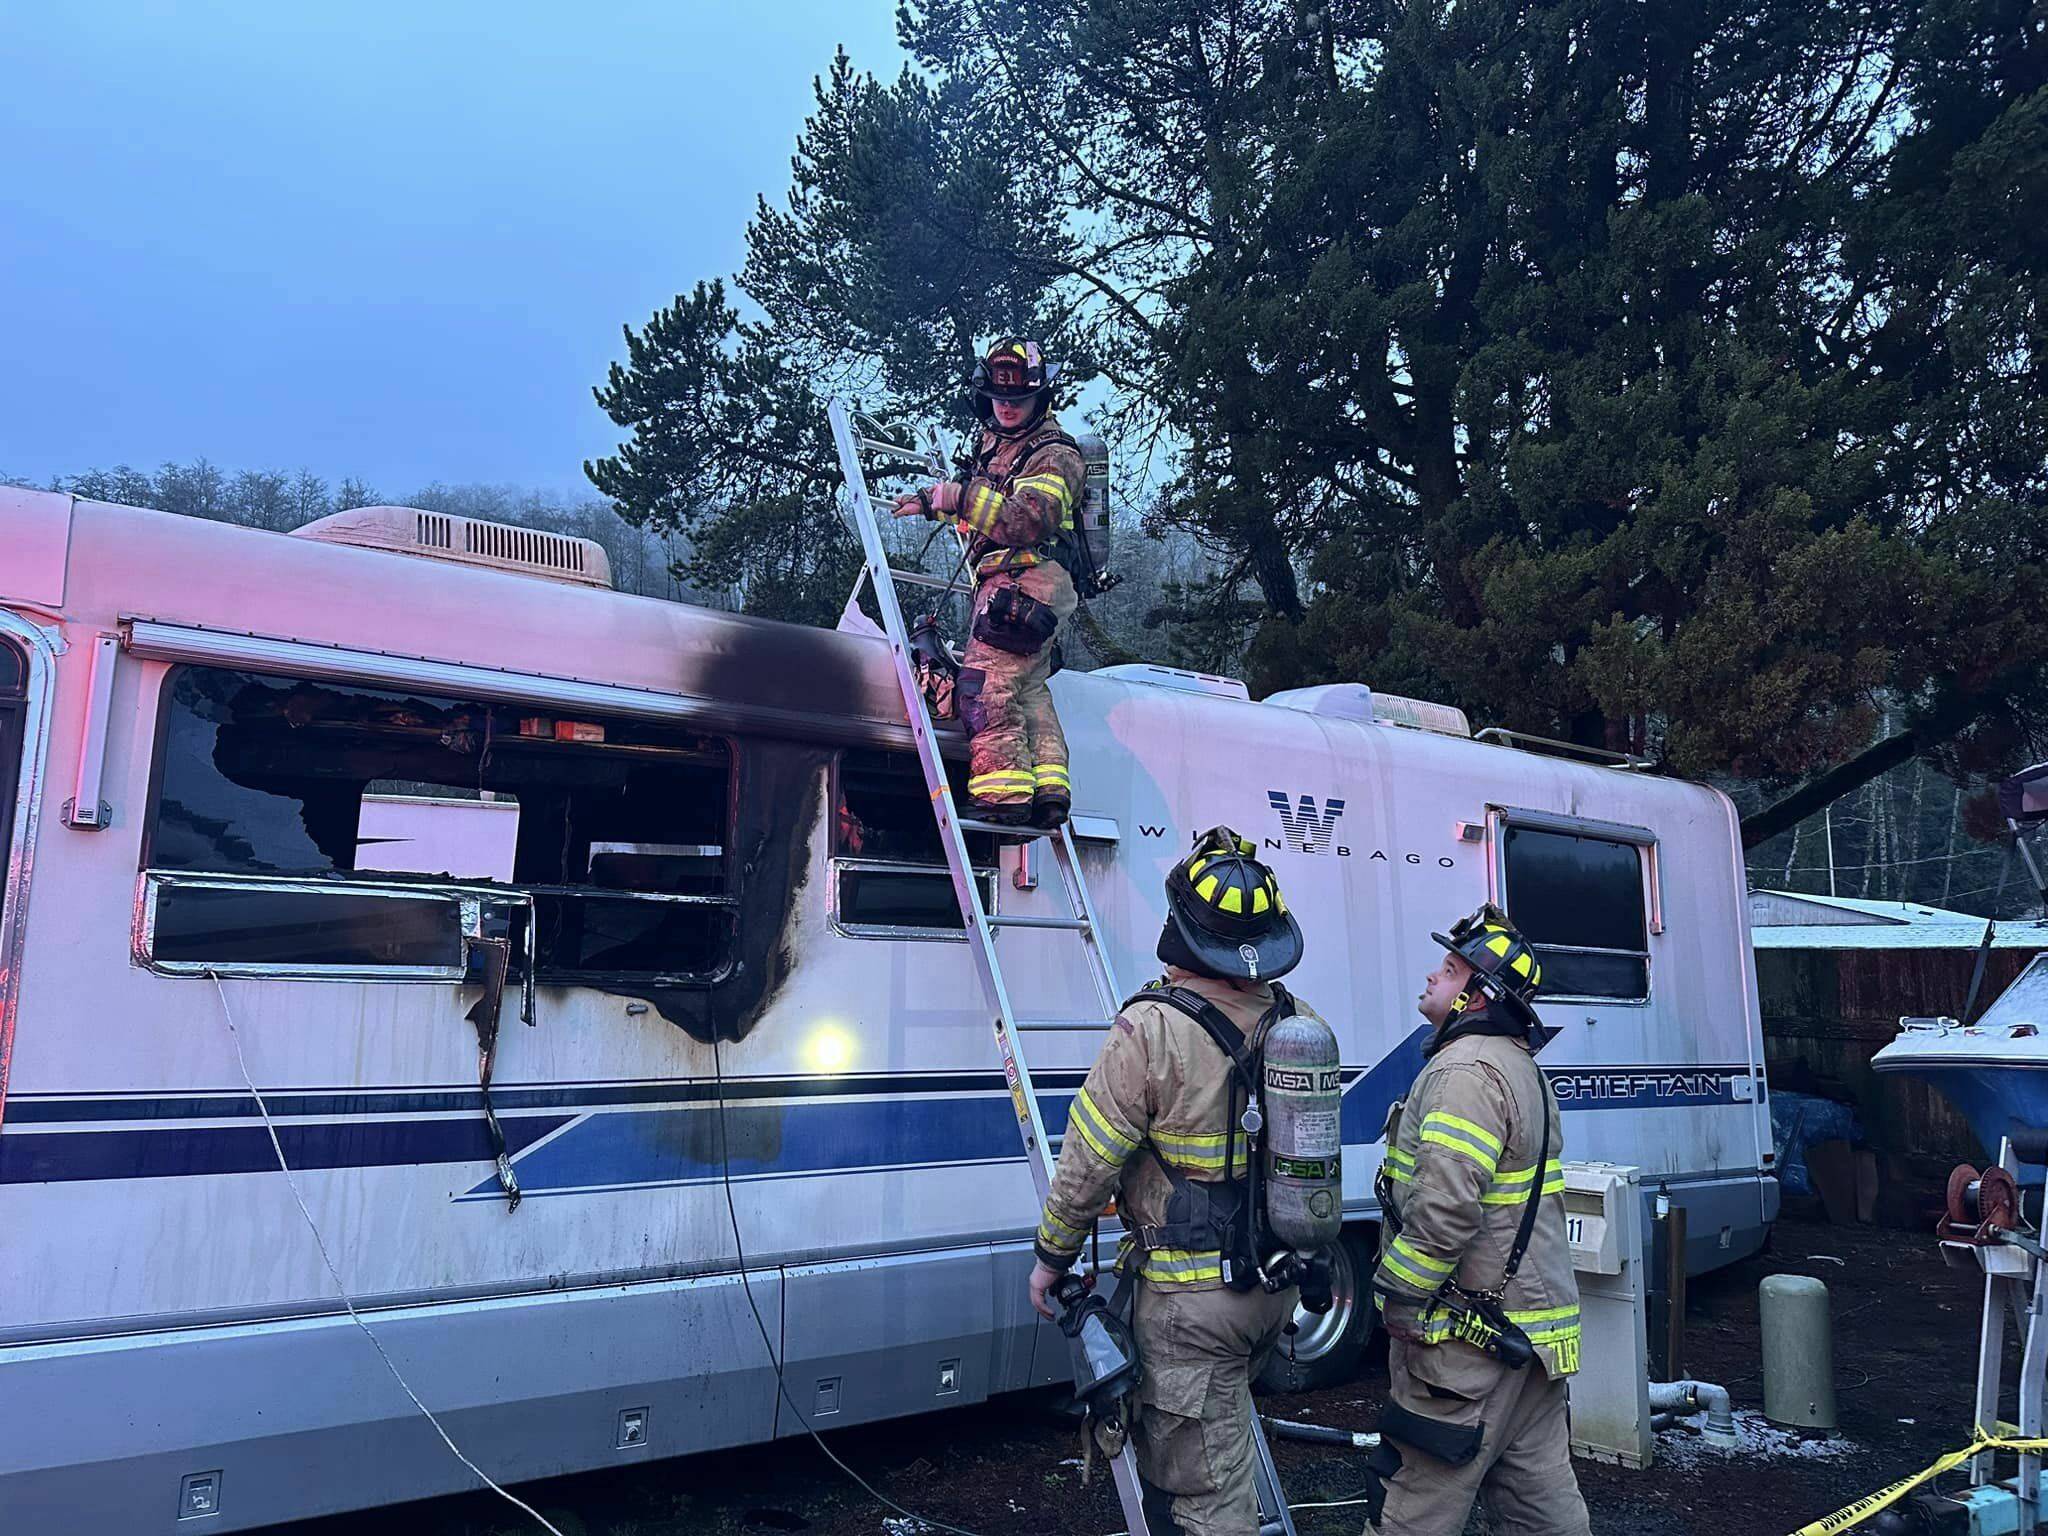 Firefighters investigate a Hoquiam trailer after a fire swept through, killing the resident. (Courtesy photo / HFD)